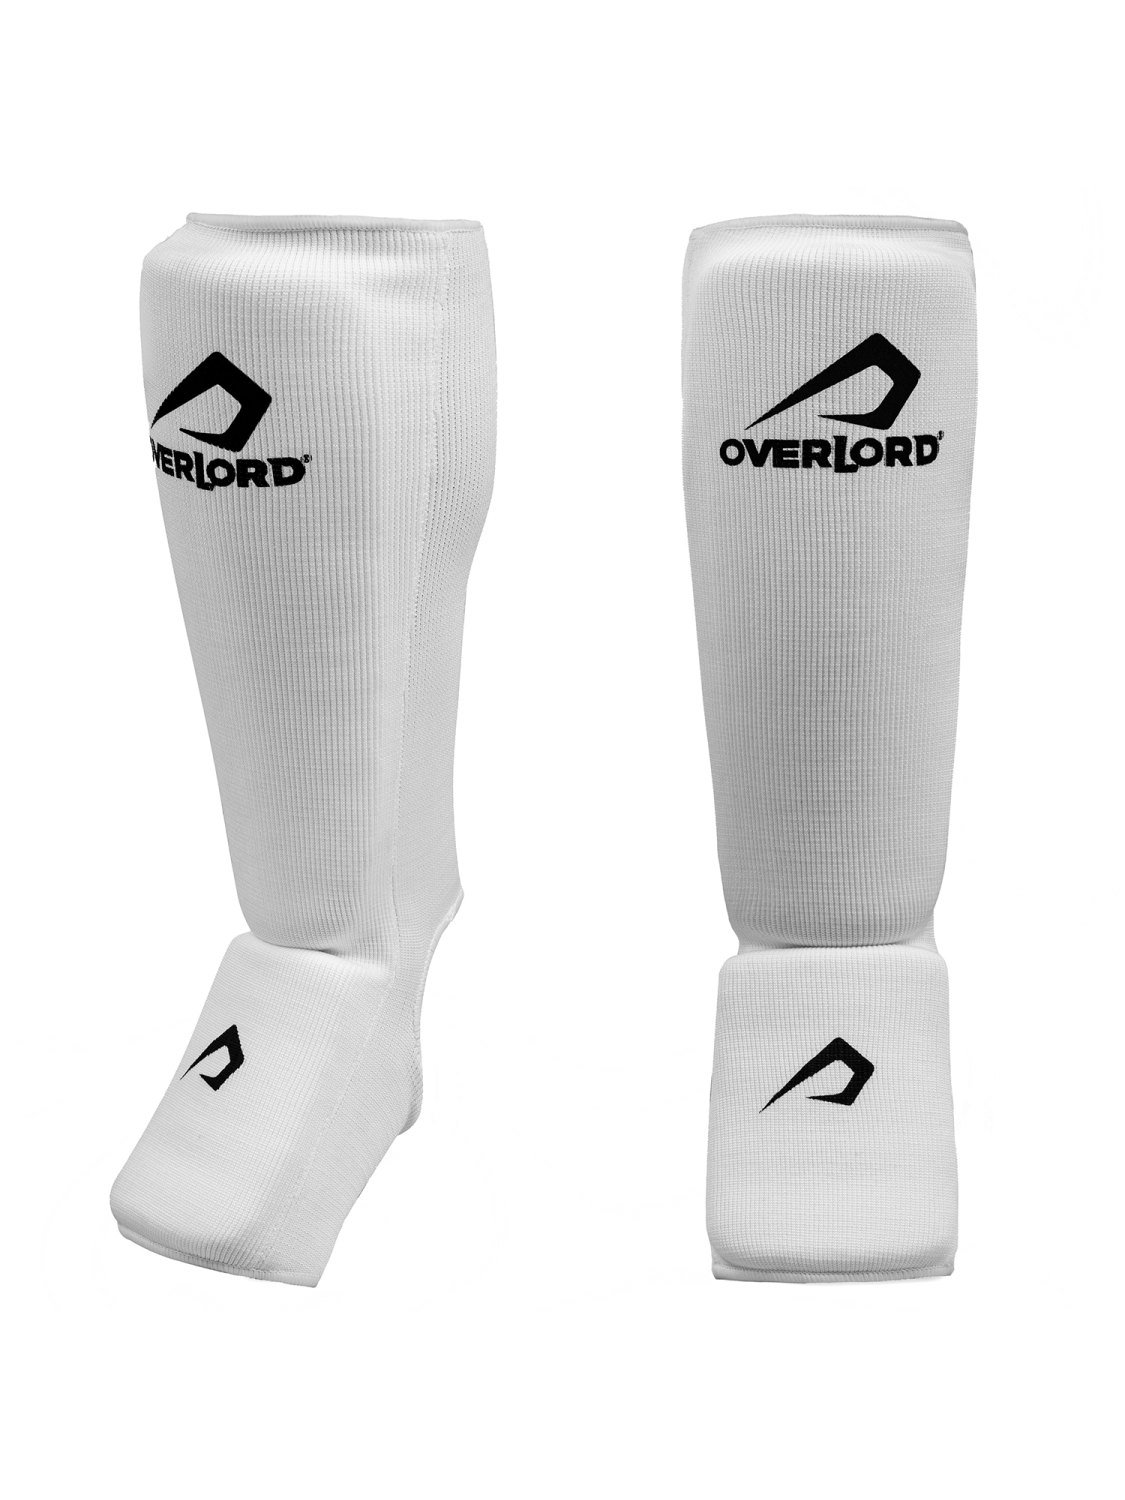 Overlord Shin Guards Elasticated